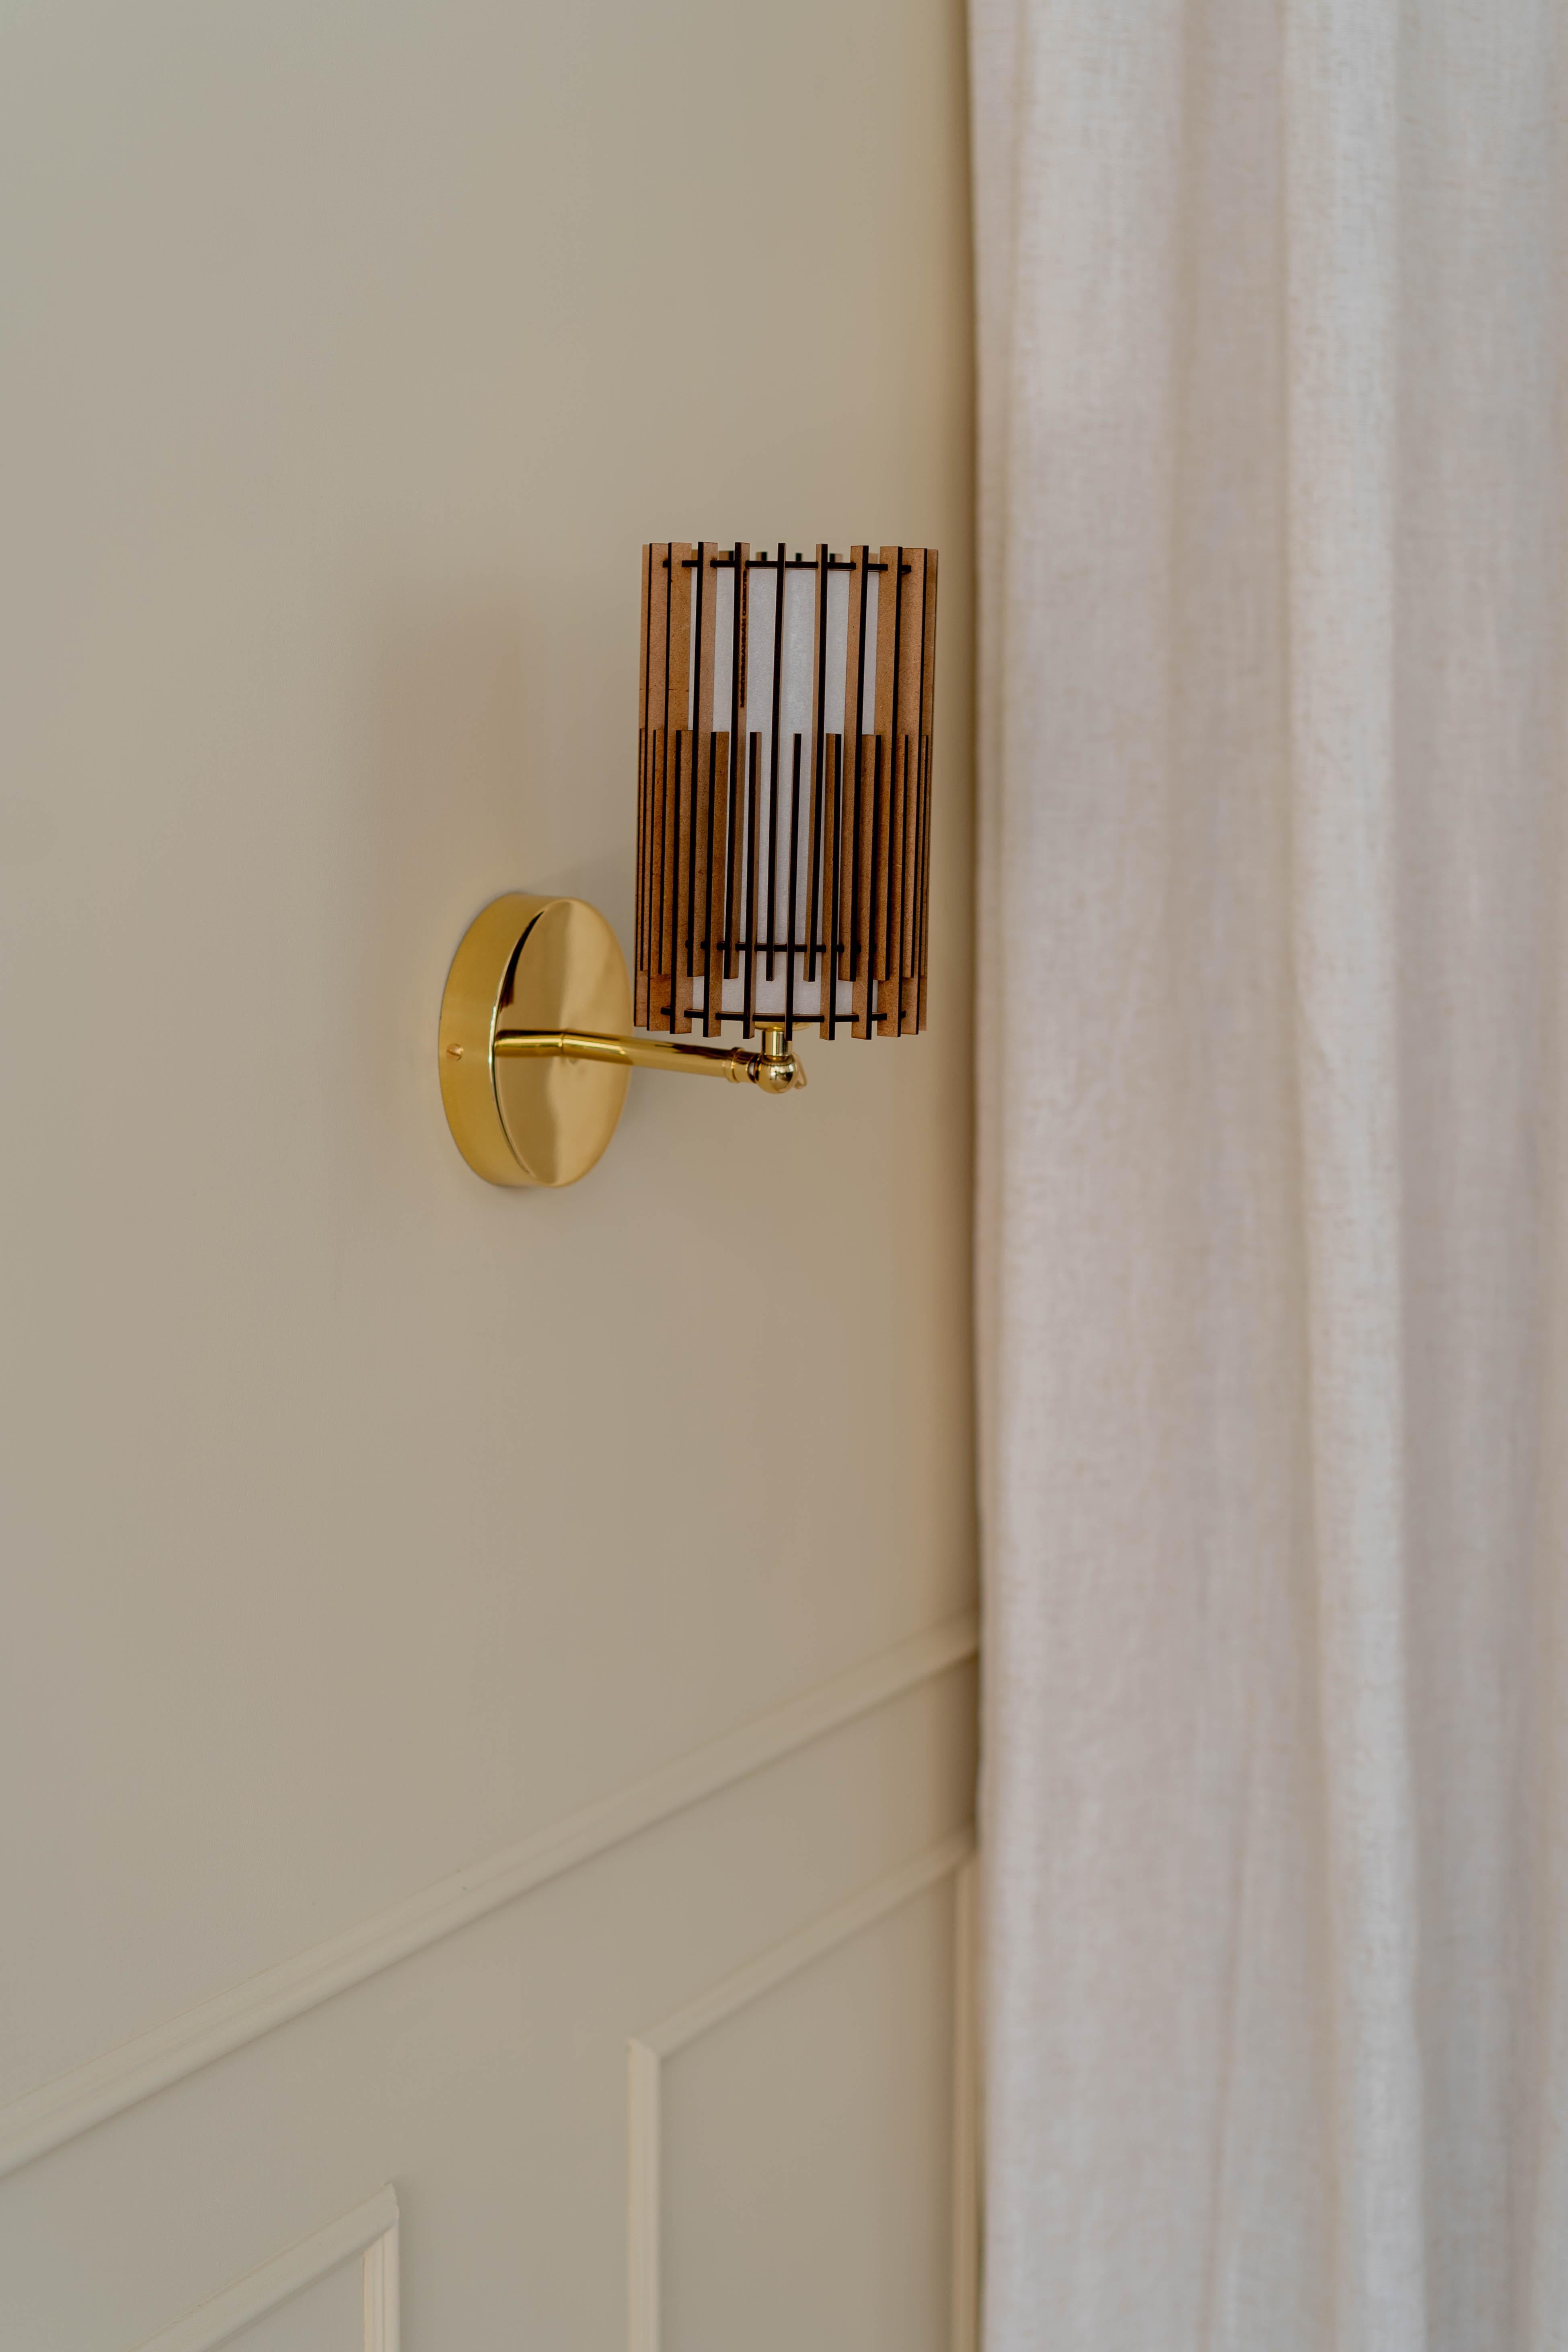 Spanish Contemporary, Handmade, Wall Sconce Lamp, MDF Wood, by Mediterranean Objects For Sale